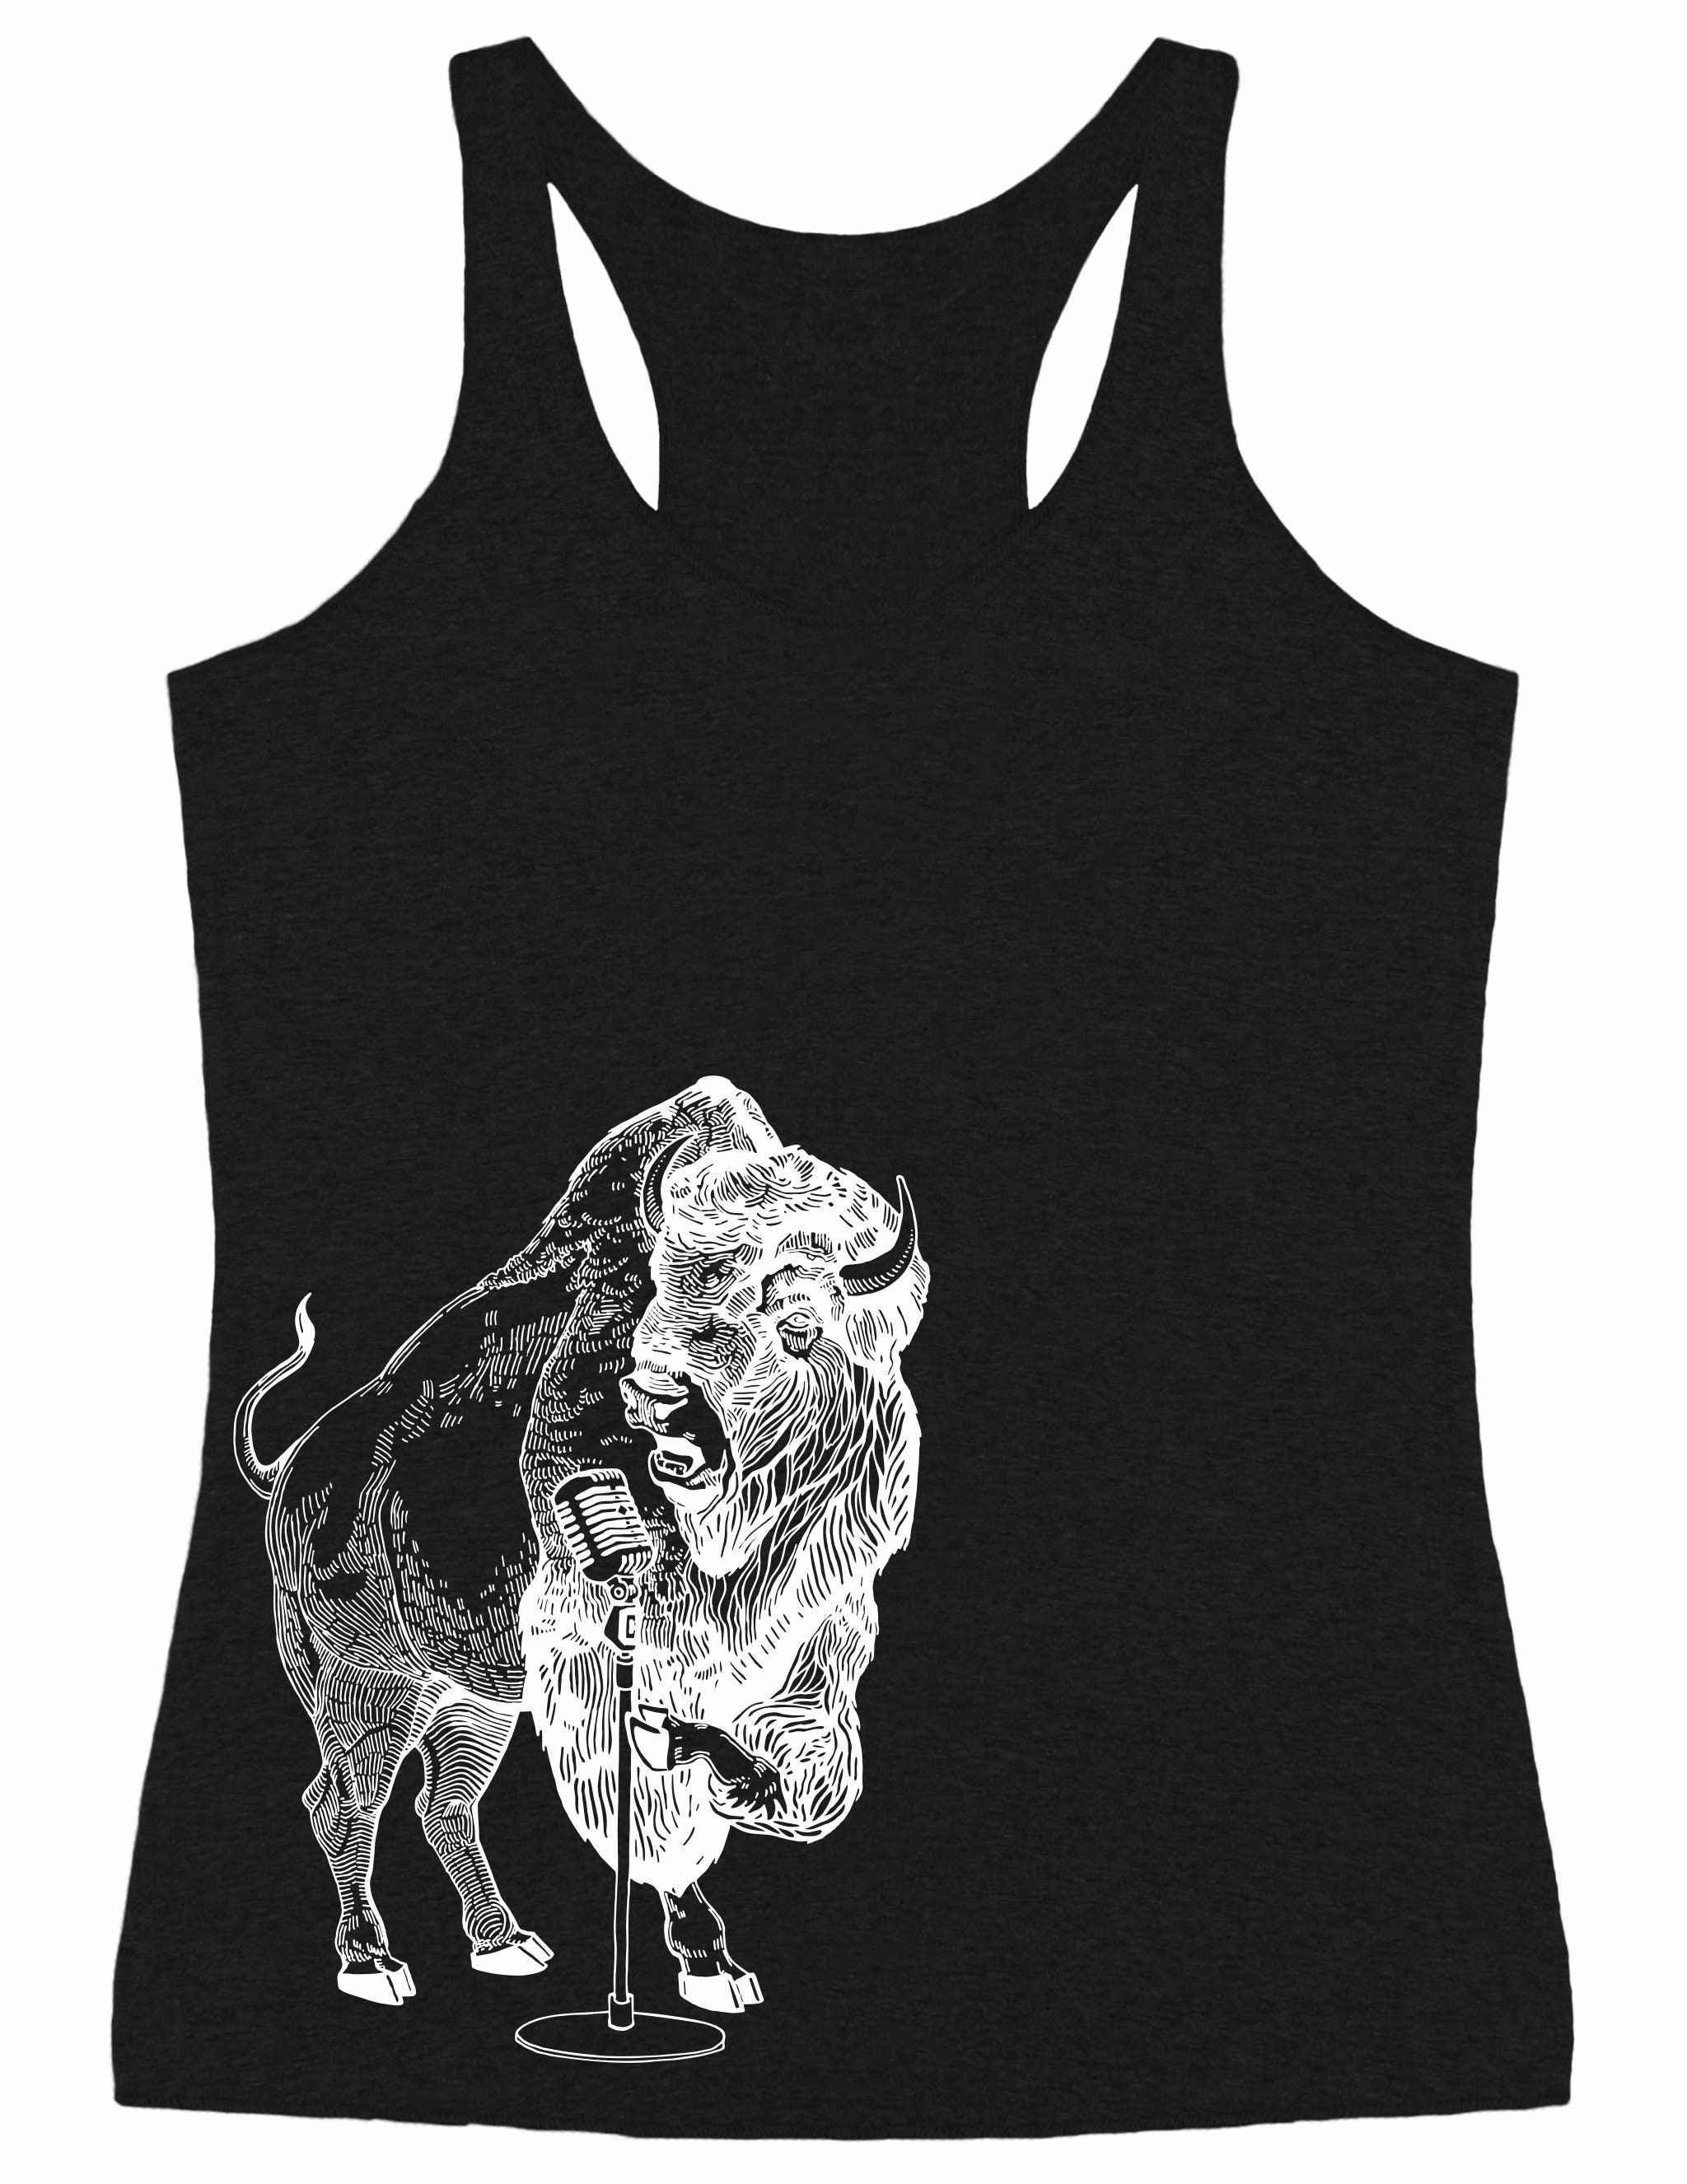 Bison Trying To Sing Women's Tri-Blend Tank Top Gift For Mom, Girlfriend Birthday, Musician Wife Her, Music Gifts S Seembo